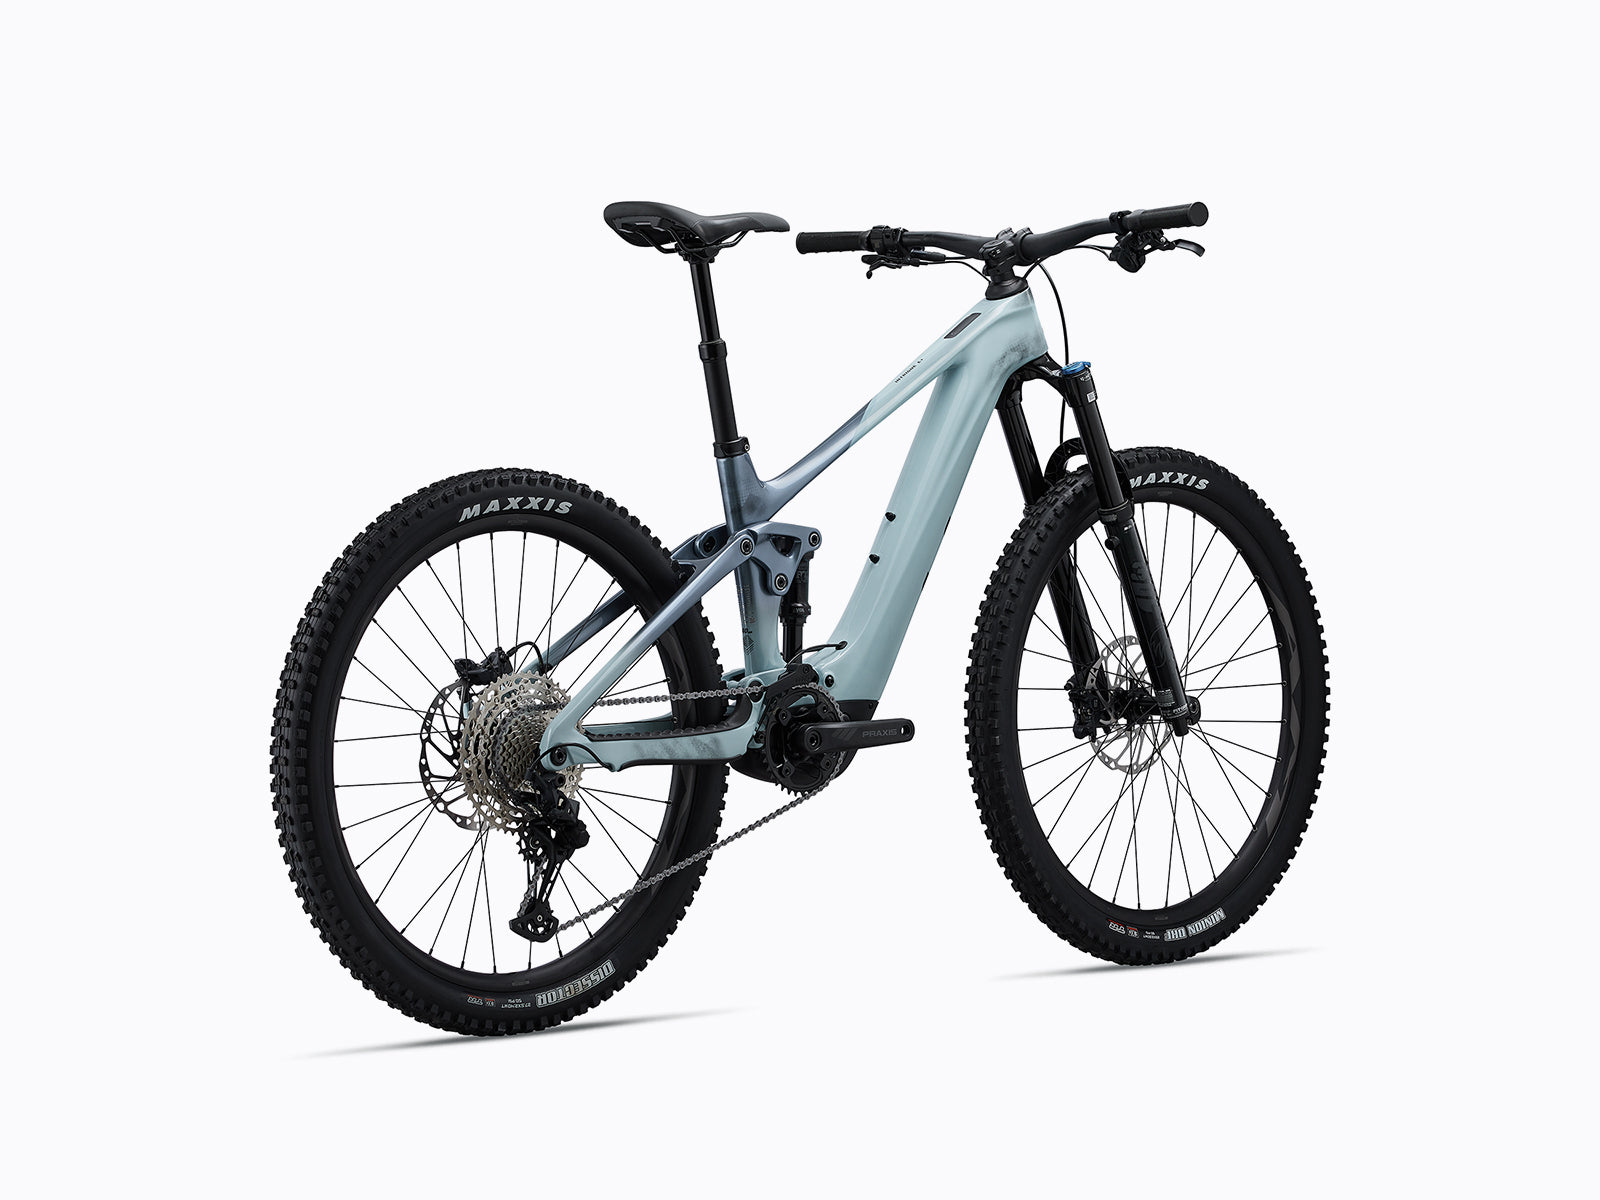 image includes product image for intrigue x advanced e+ elite 2, now available to order on giant bicycles australia